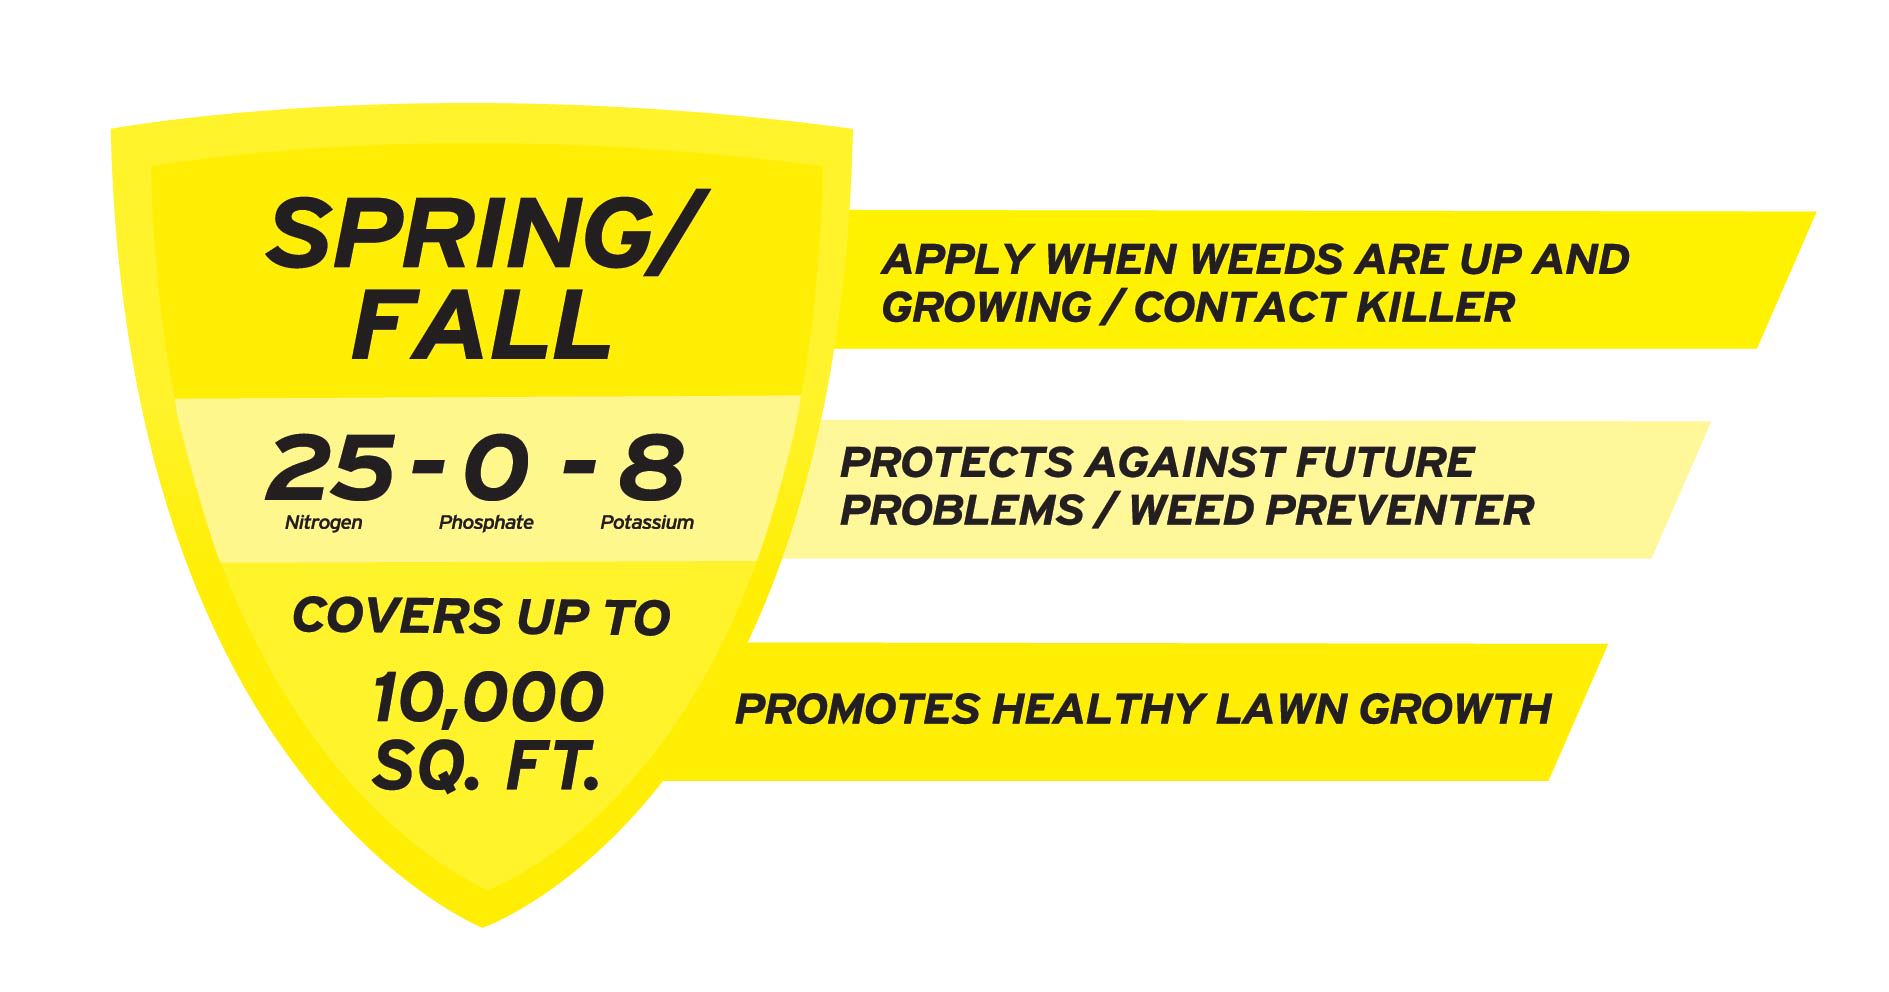 Estate spring/fall weed and feed with lawn fertilizer shield graphic with product facts and NPK ratio